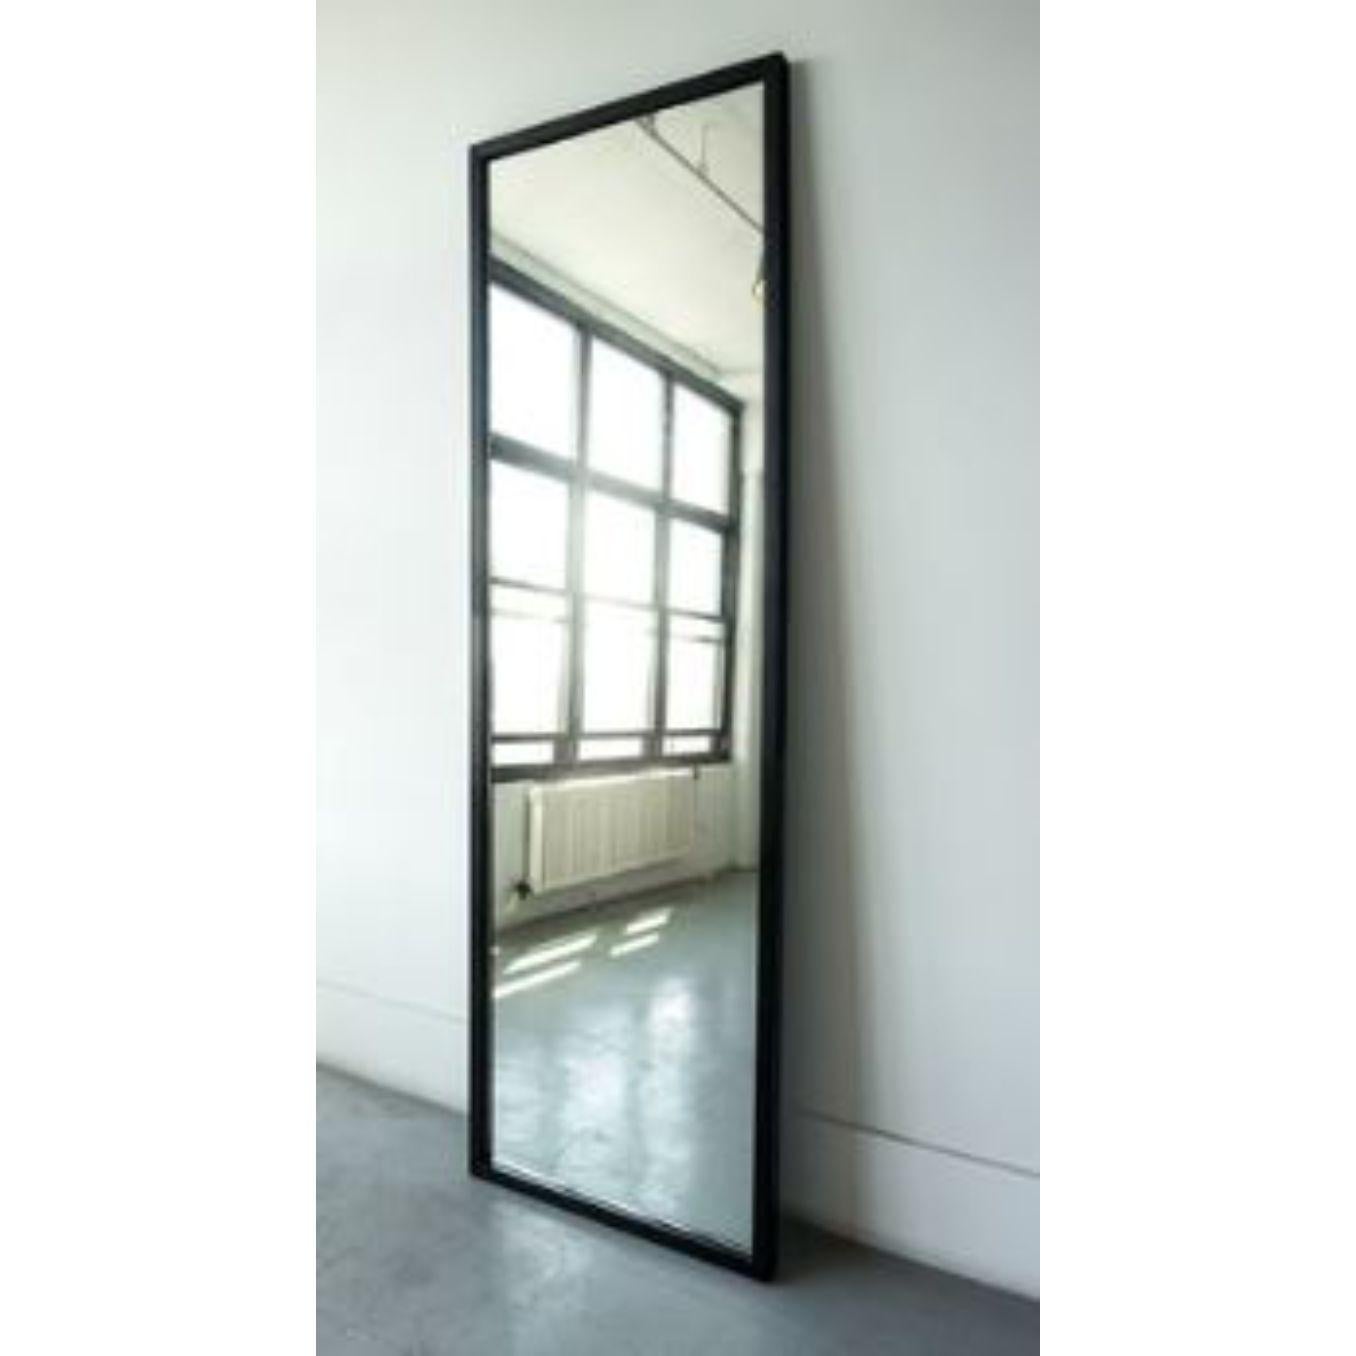 Hansha mirror by Swell Studio
Dimensions: D6 x W79 x H244 cm 
Material: burnt ash, blackened and waxed steel


This piece was inspired by the ponds at the Shinjuku Goyen National Gardens in Tokyo. the top half of the mirror is constructed from